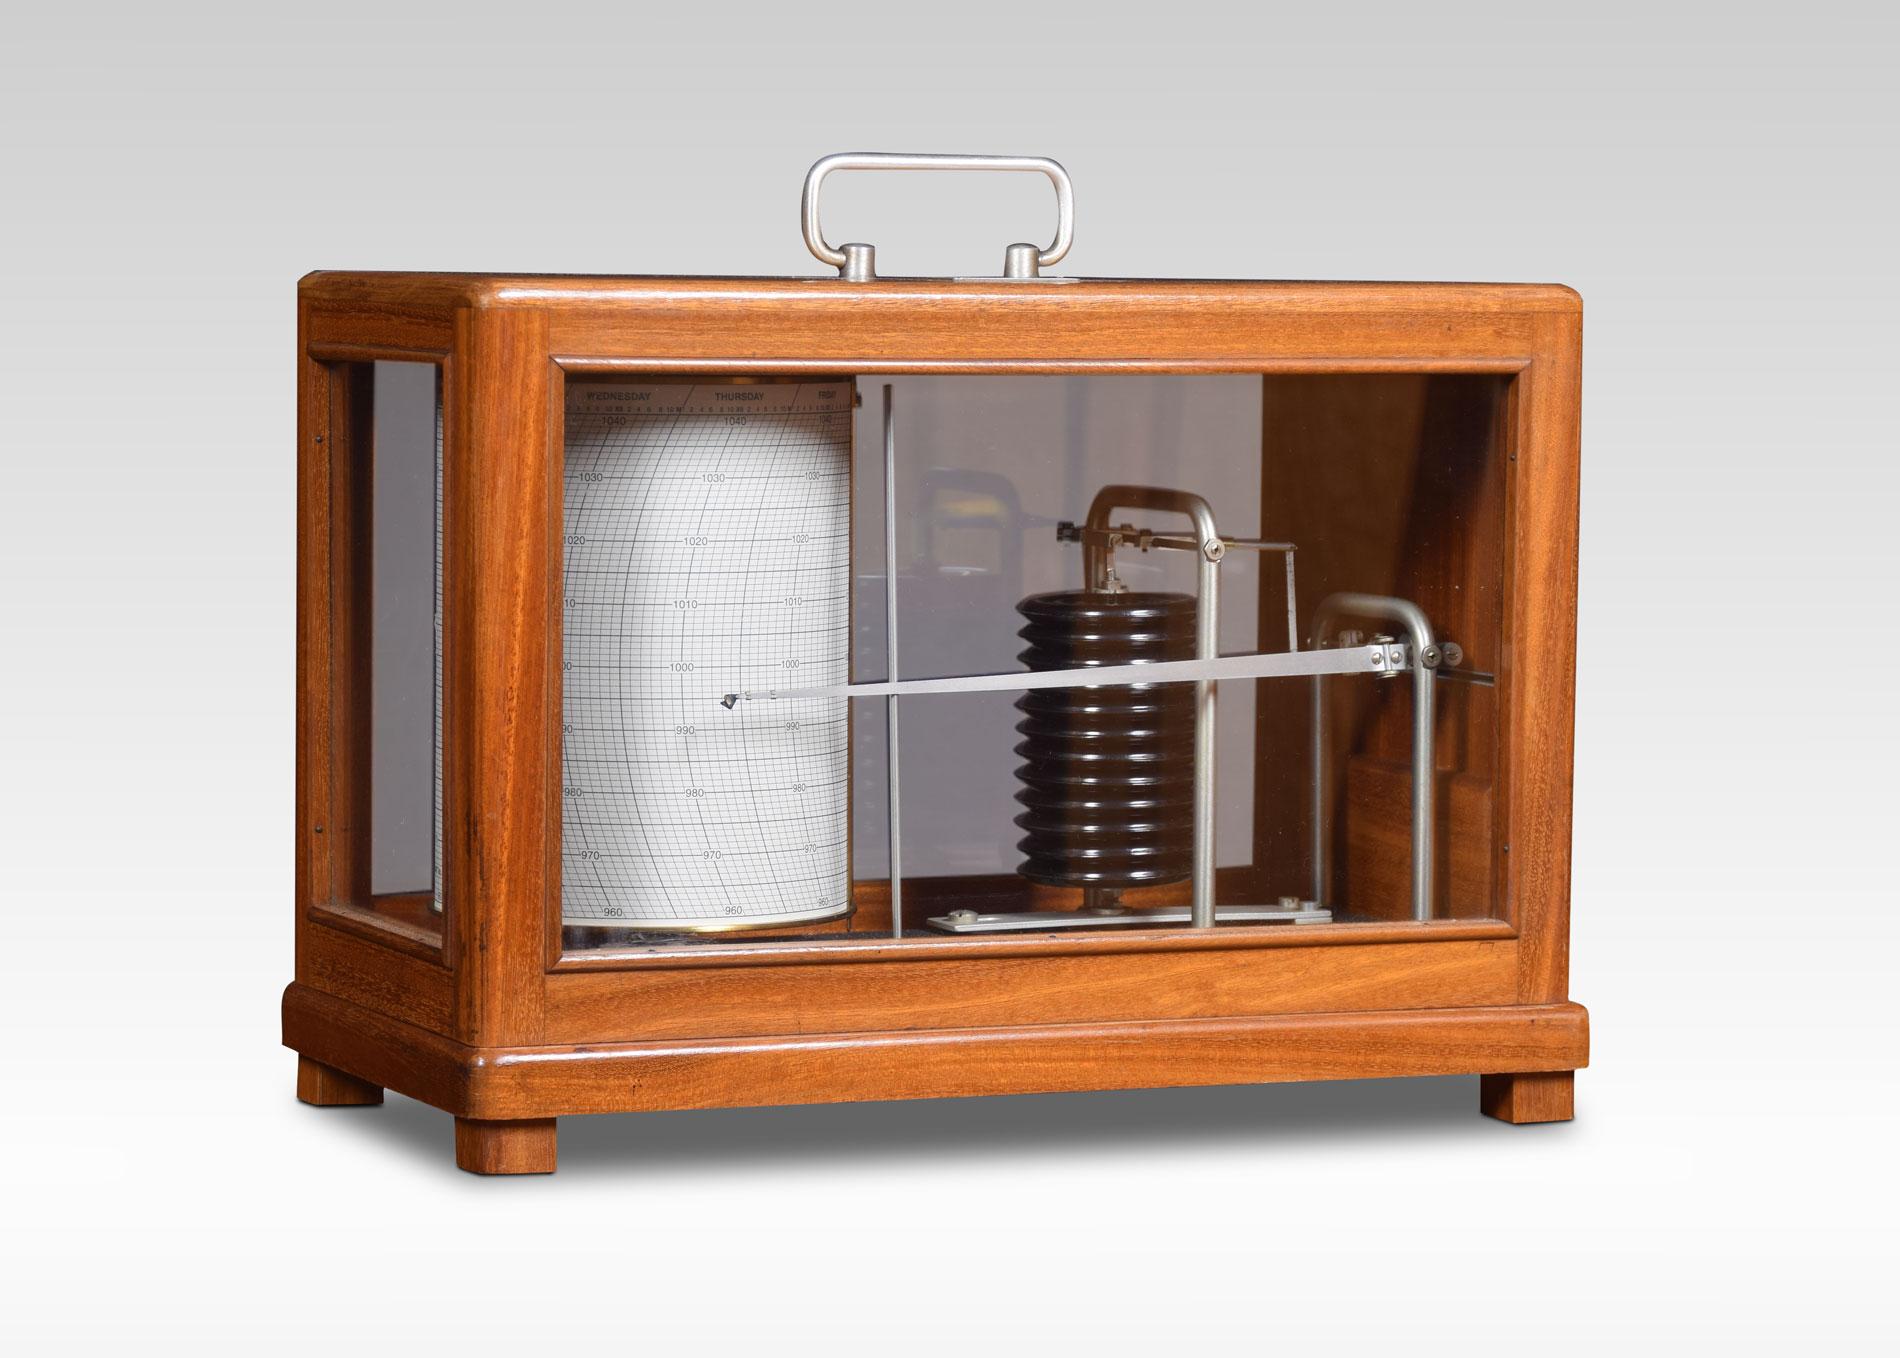 Mahogany framed barograph by R Fuess, Berlin. The mechanical eight-day movement is housed in the drum, fitted with a seven-day chart which covers one full rotation of the drum. The ink trace, or barogram, on the recording paper, is a visual record